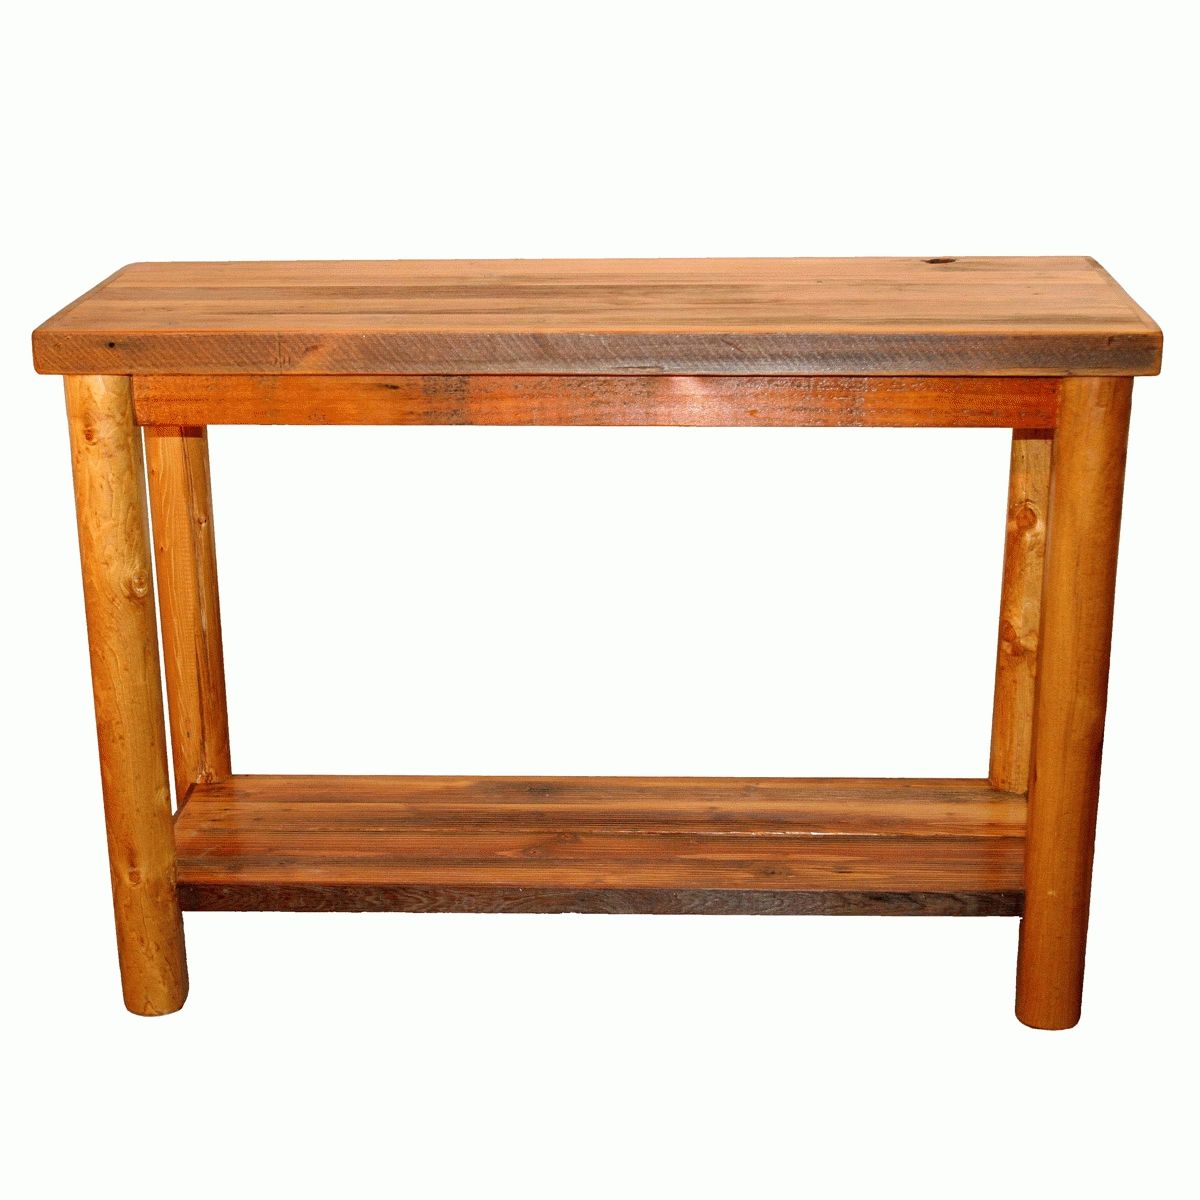 Barnwood Sofa Table With Shelf Intended For Barnwood Sofa Tables (View 12 of 15)